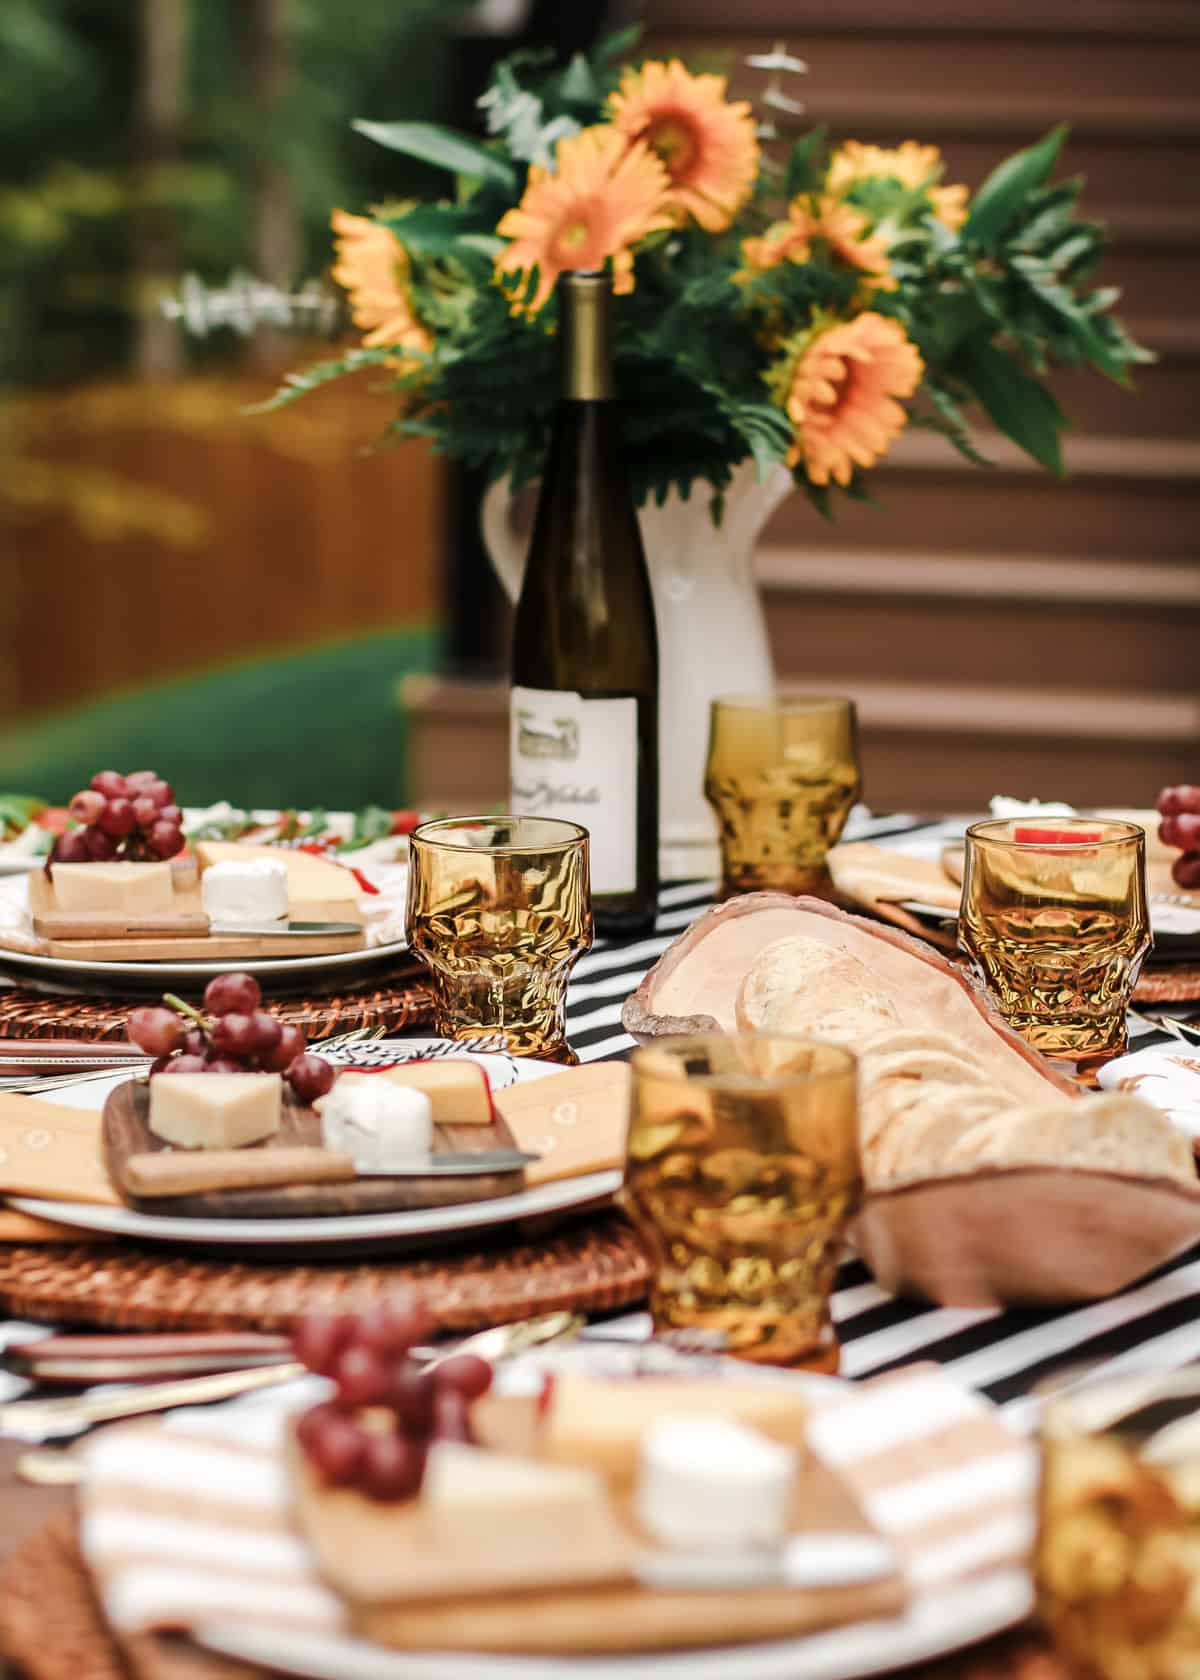 outdoor table setting for fall with sunflowers centerpiece.